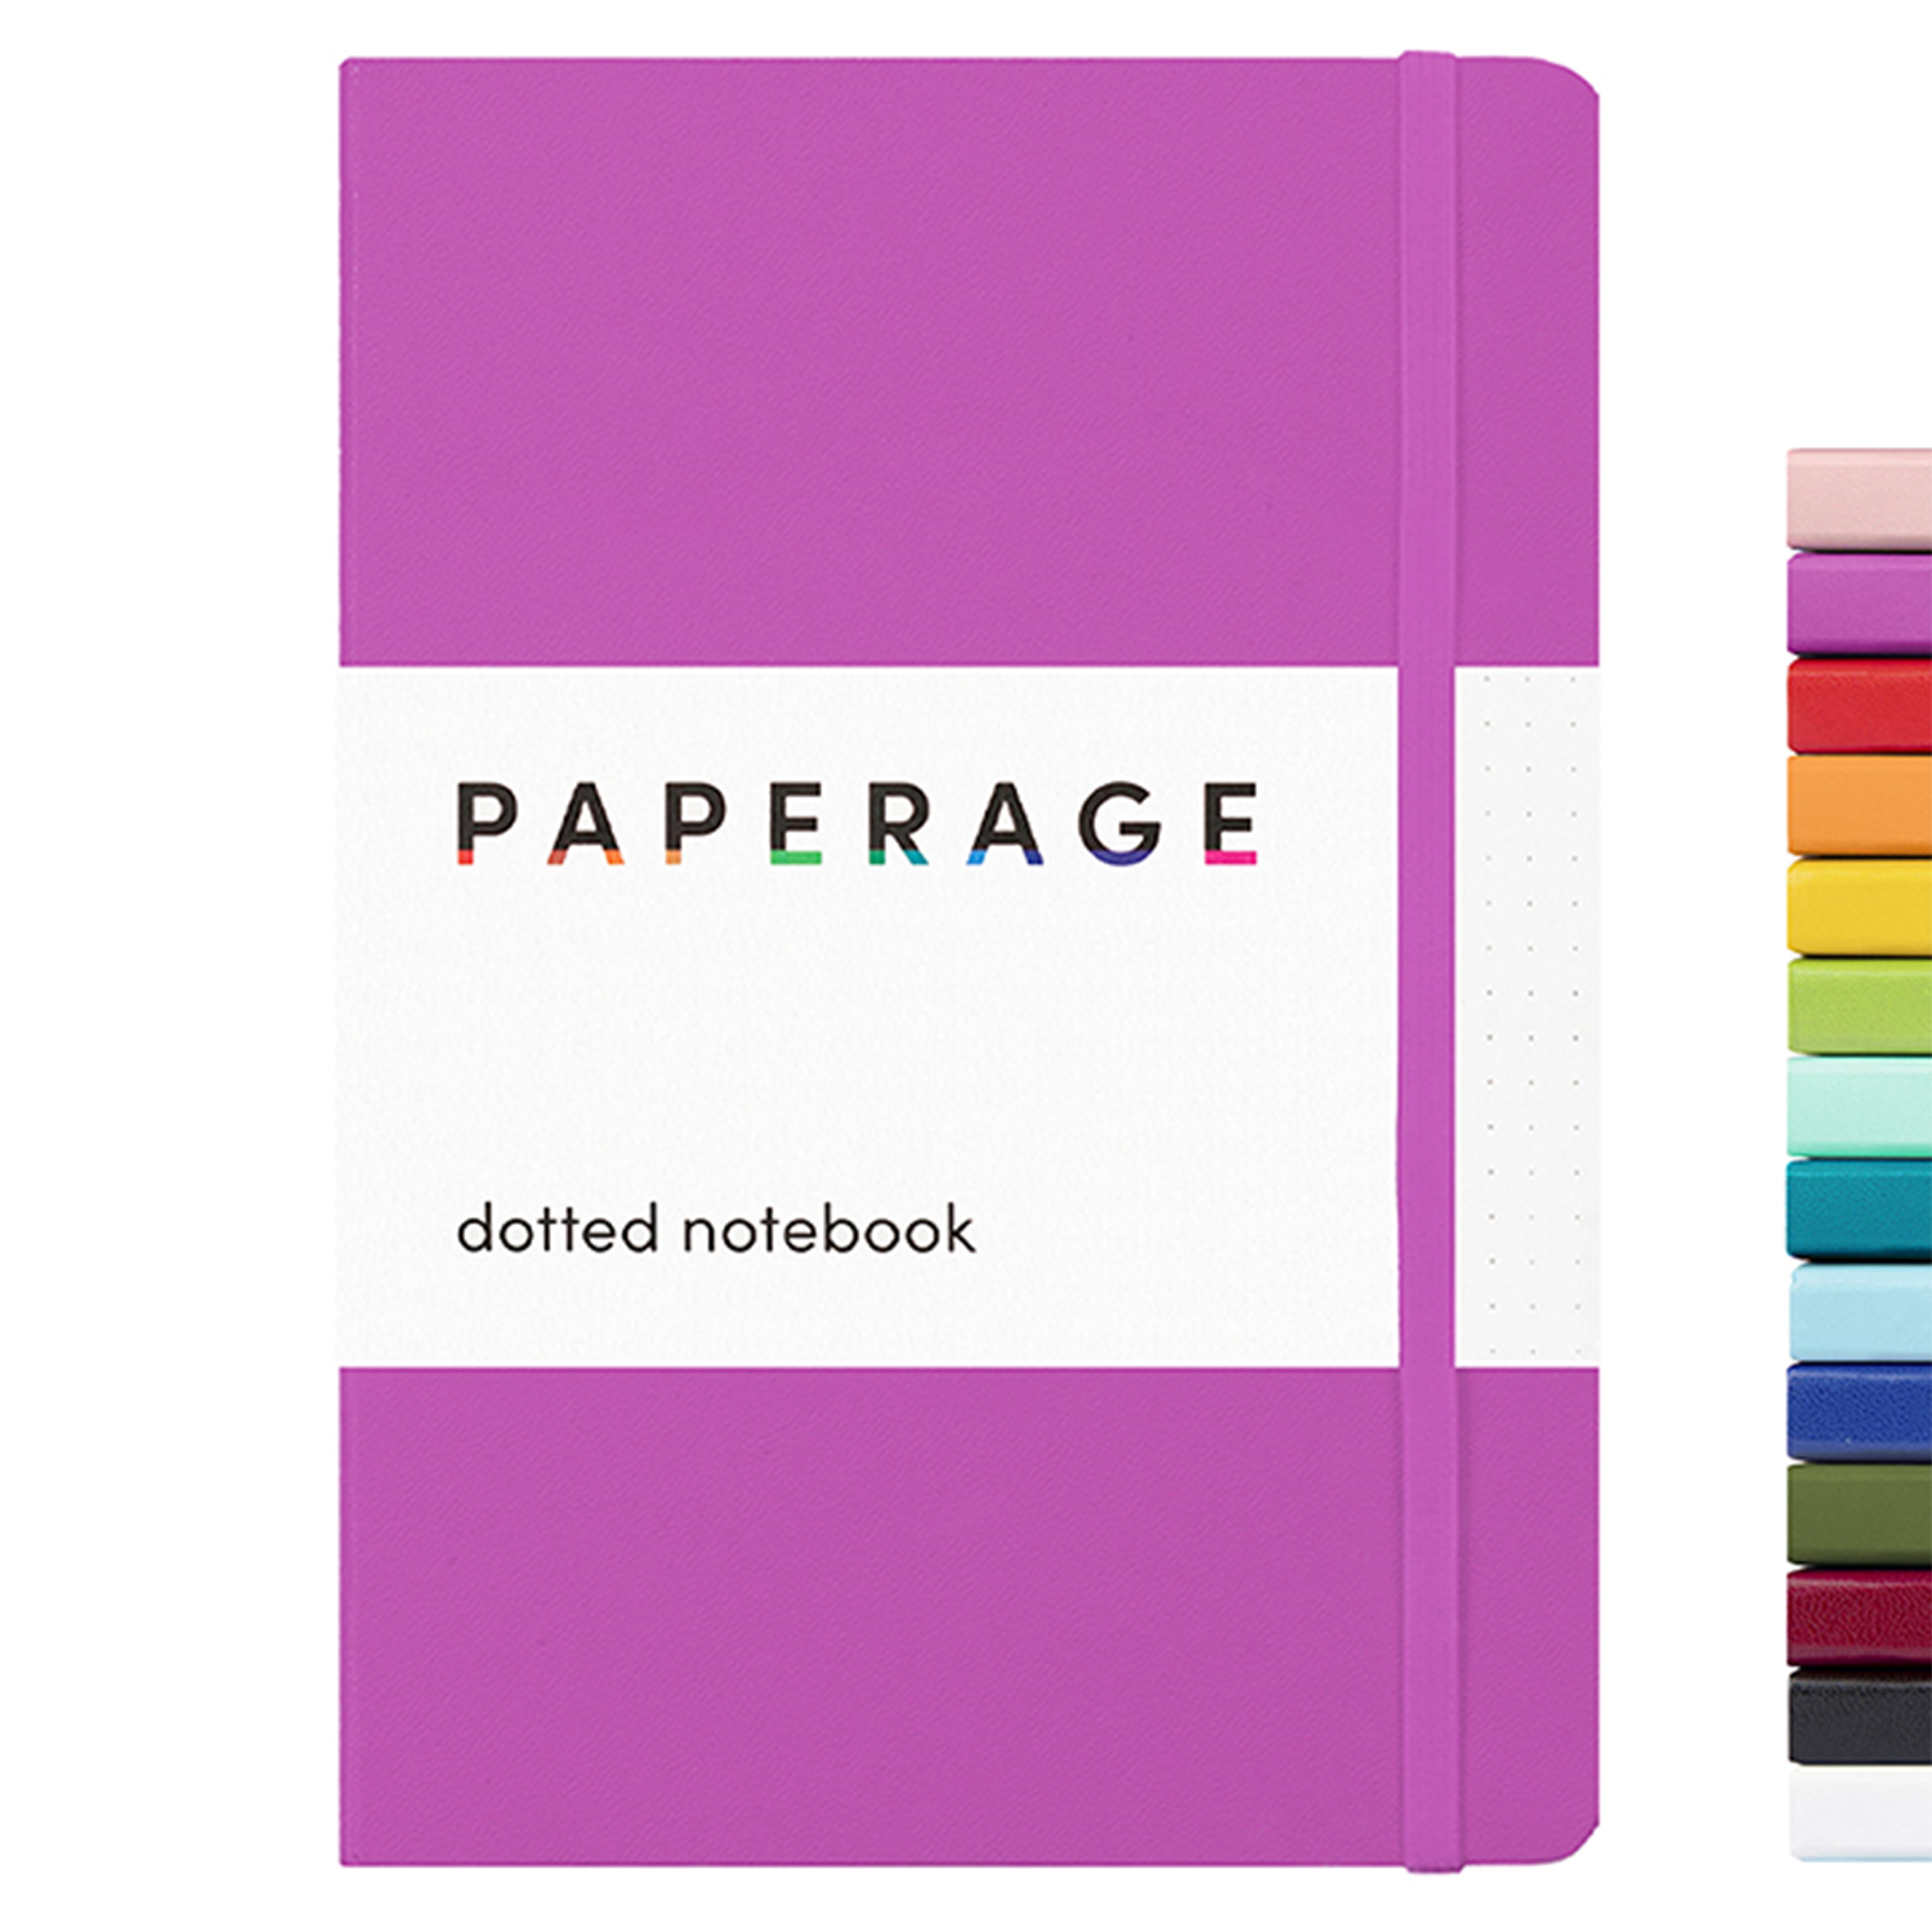 PAPERAGE Dotted Journal Notebook, (Raspberry), 160 Pages, Hardcover, 5.7” x  8” 